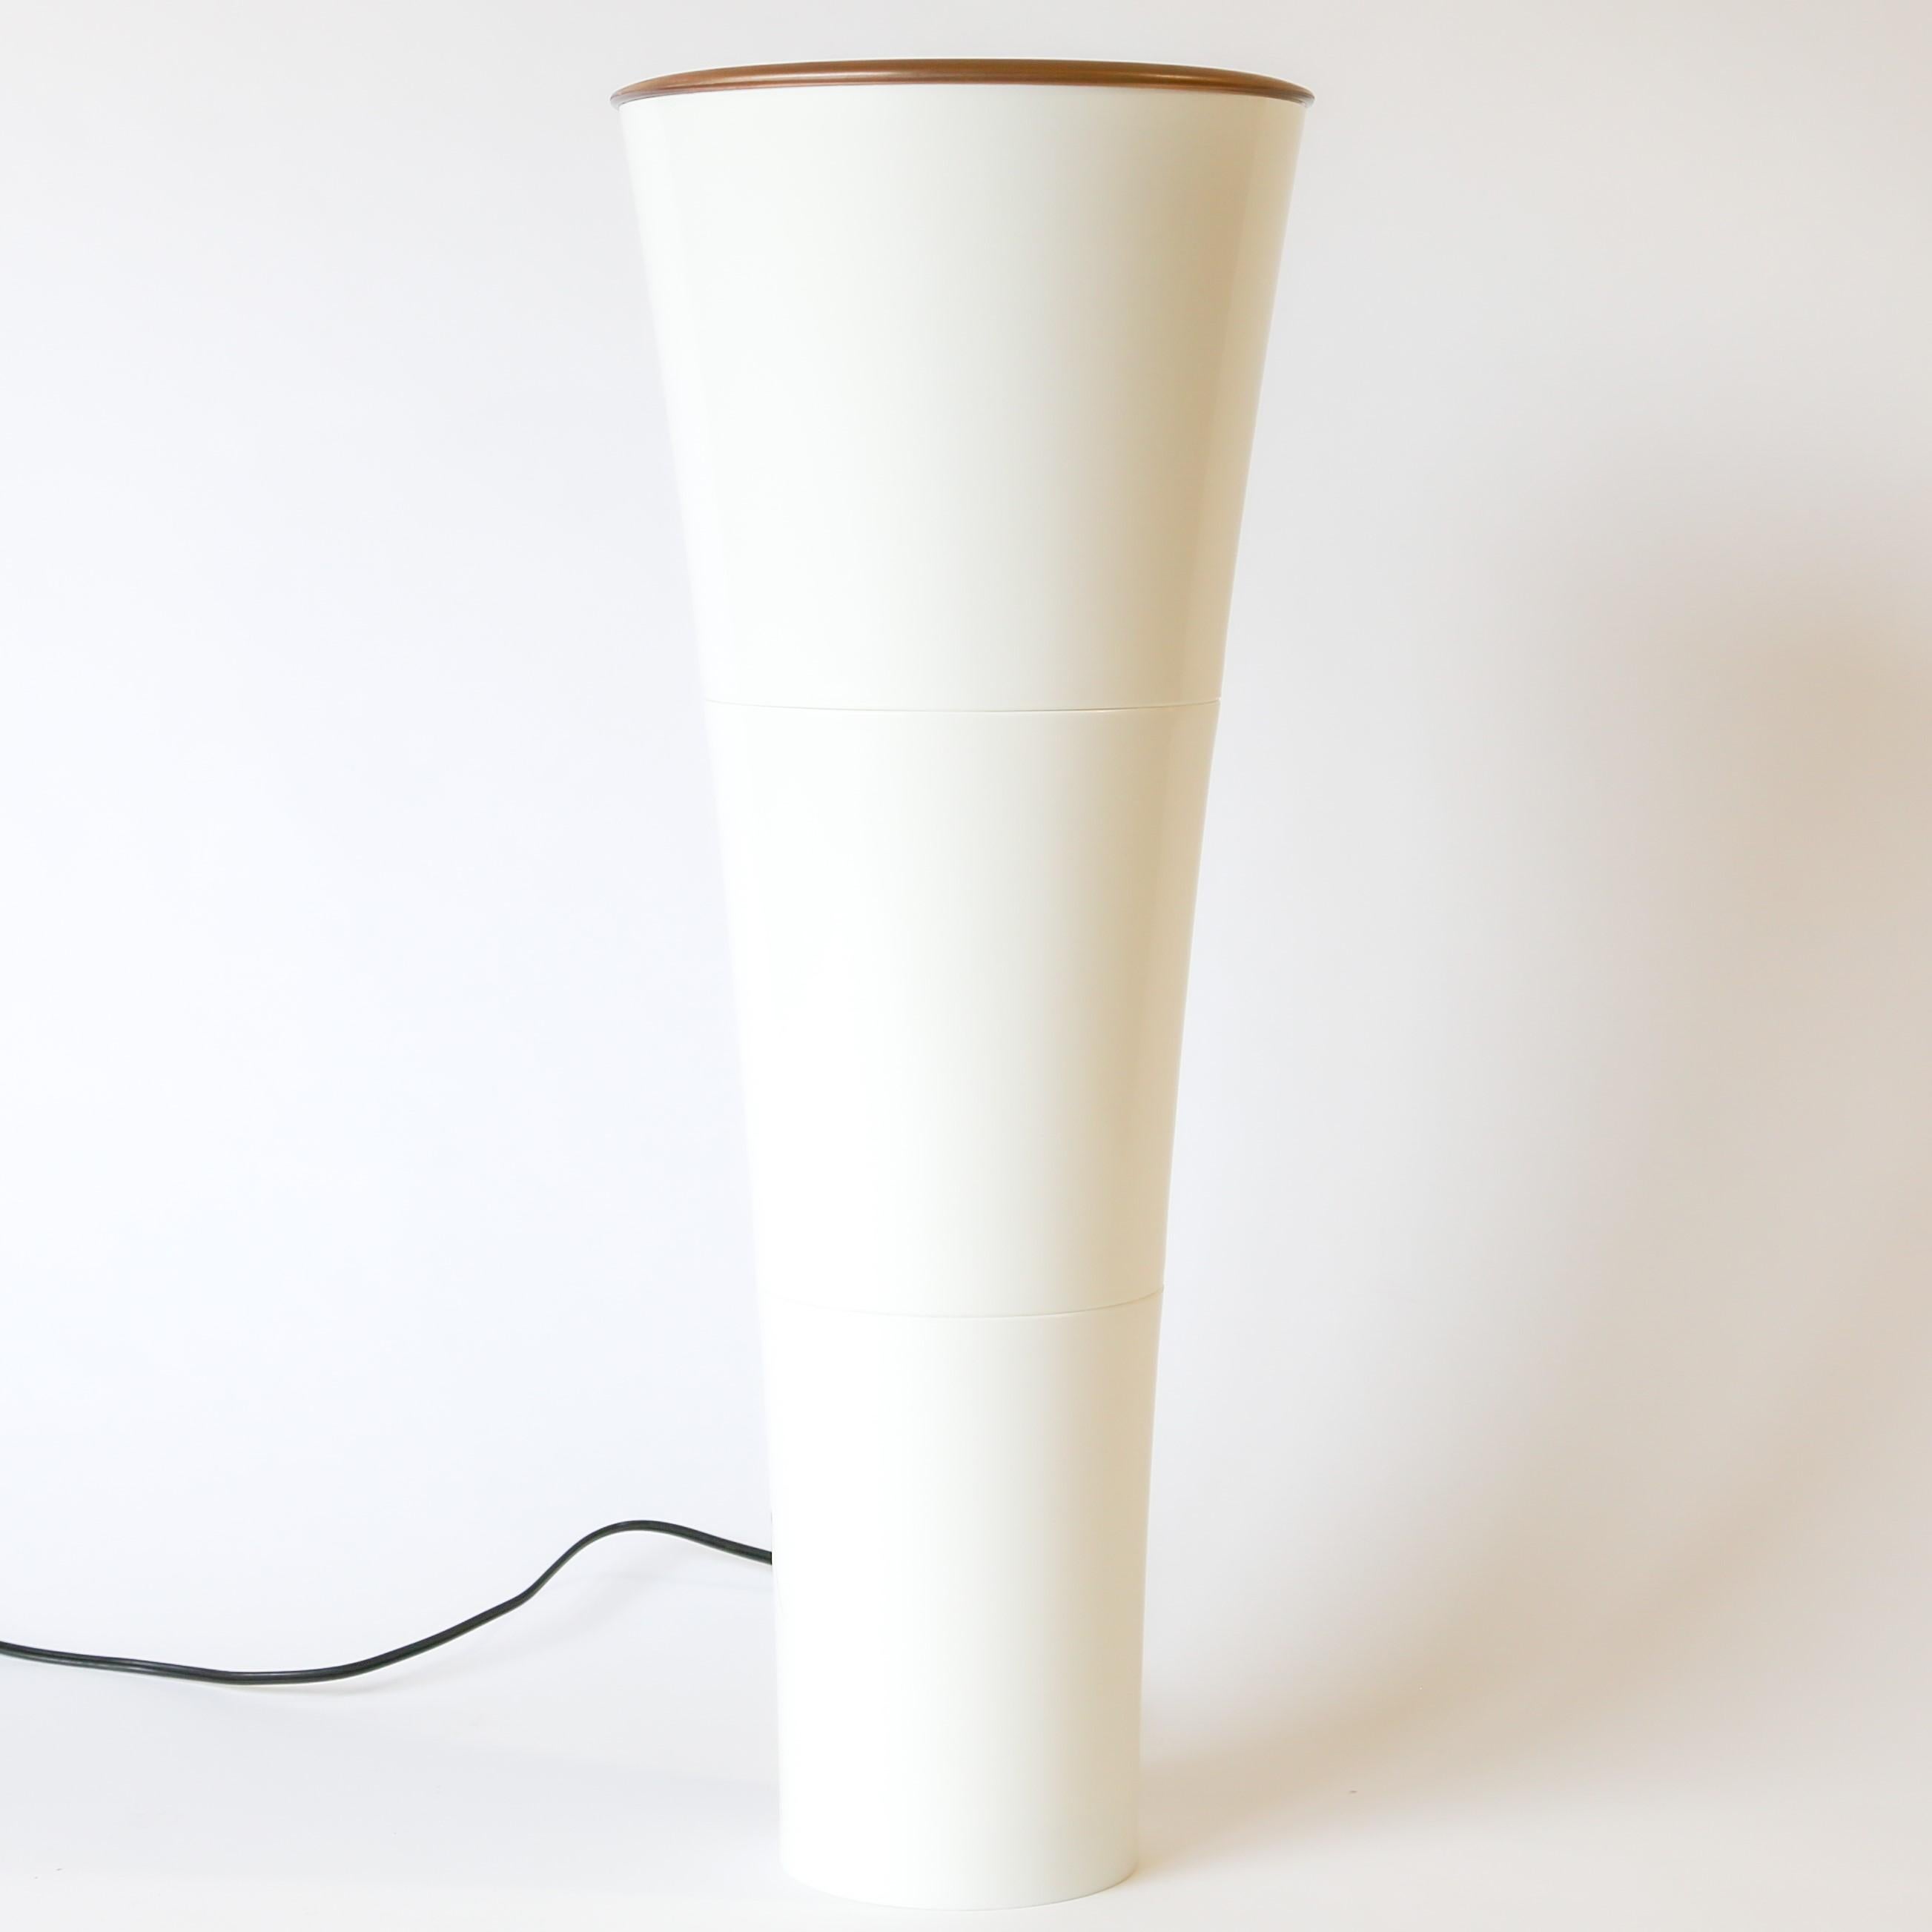 1980s Postmodern uplit conical torchiere floor lamp by Fackla with dimmer. It measures 31